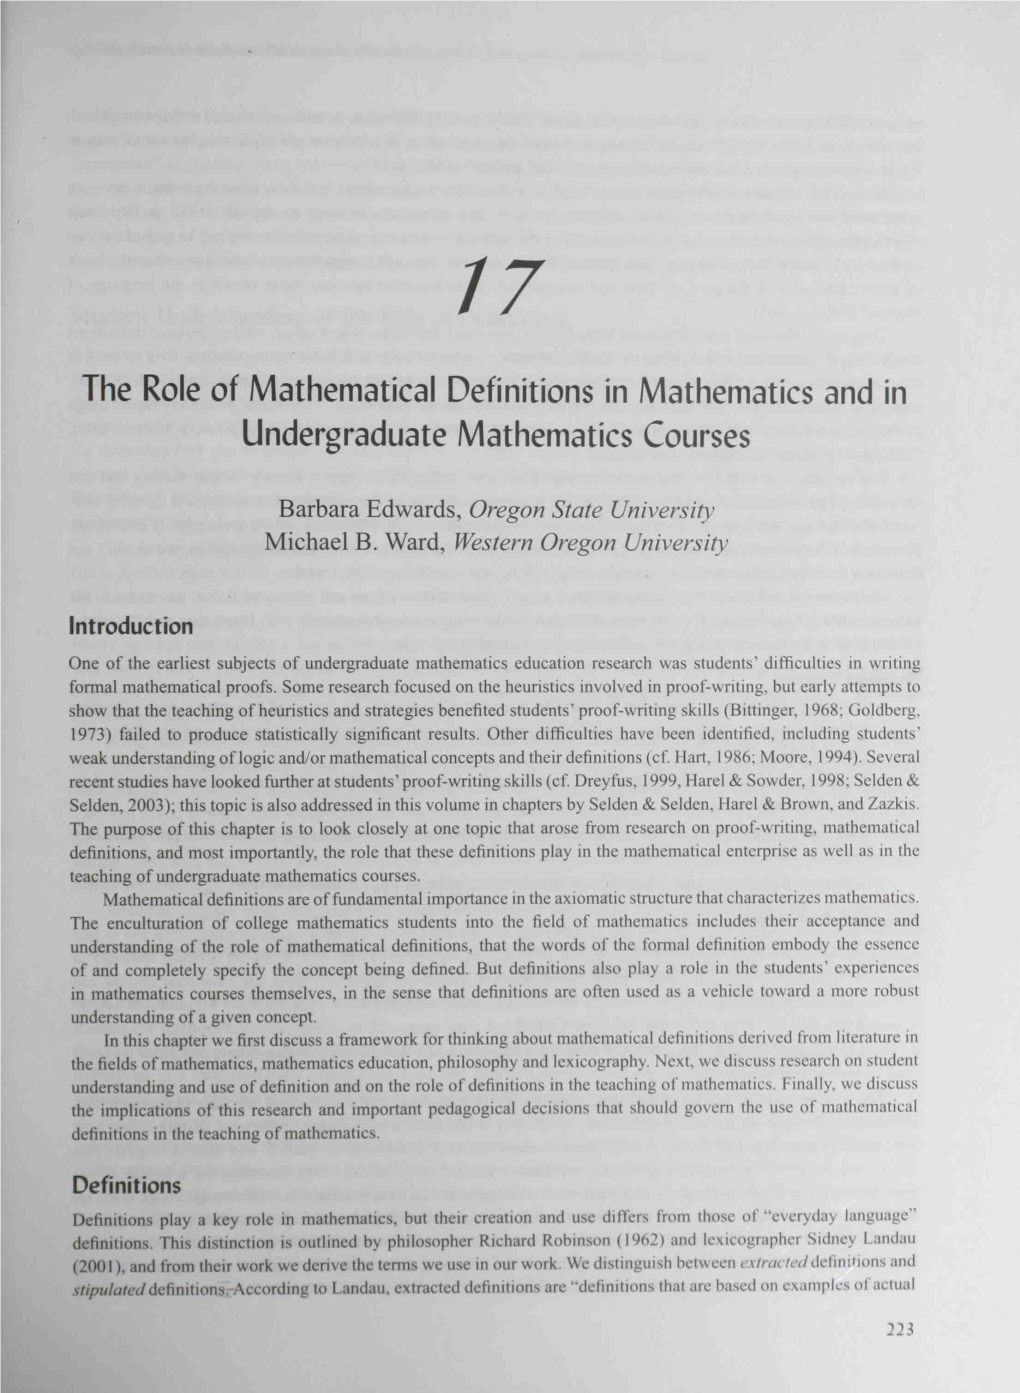 The Role of Mathematical Definitions in Mathematics and in Undergraduate Mathematics Courses